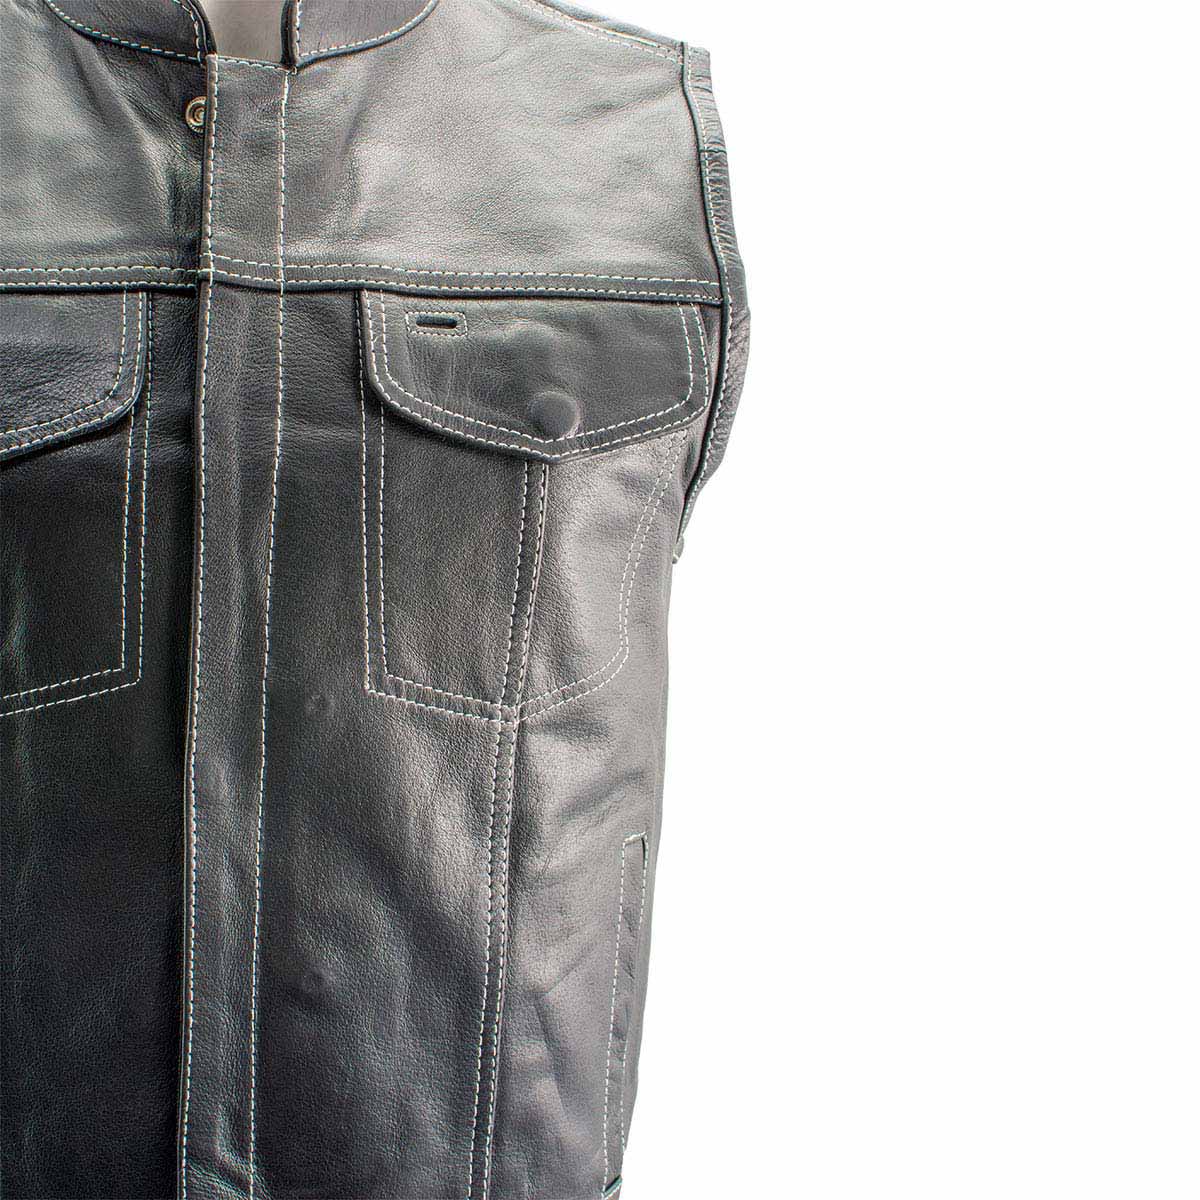 Xelement XS3450 Men's Black 'Paisley' Leather Motorcycle Biker Rider Vest with White Stitching